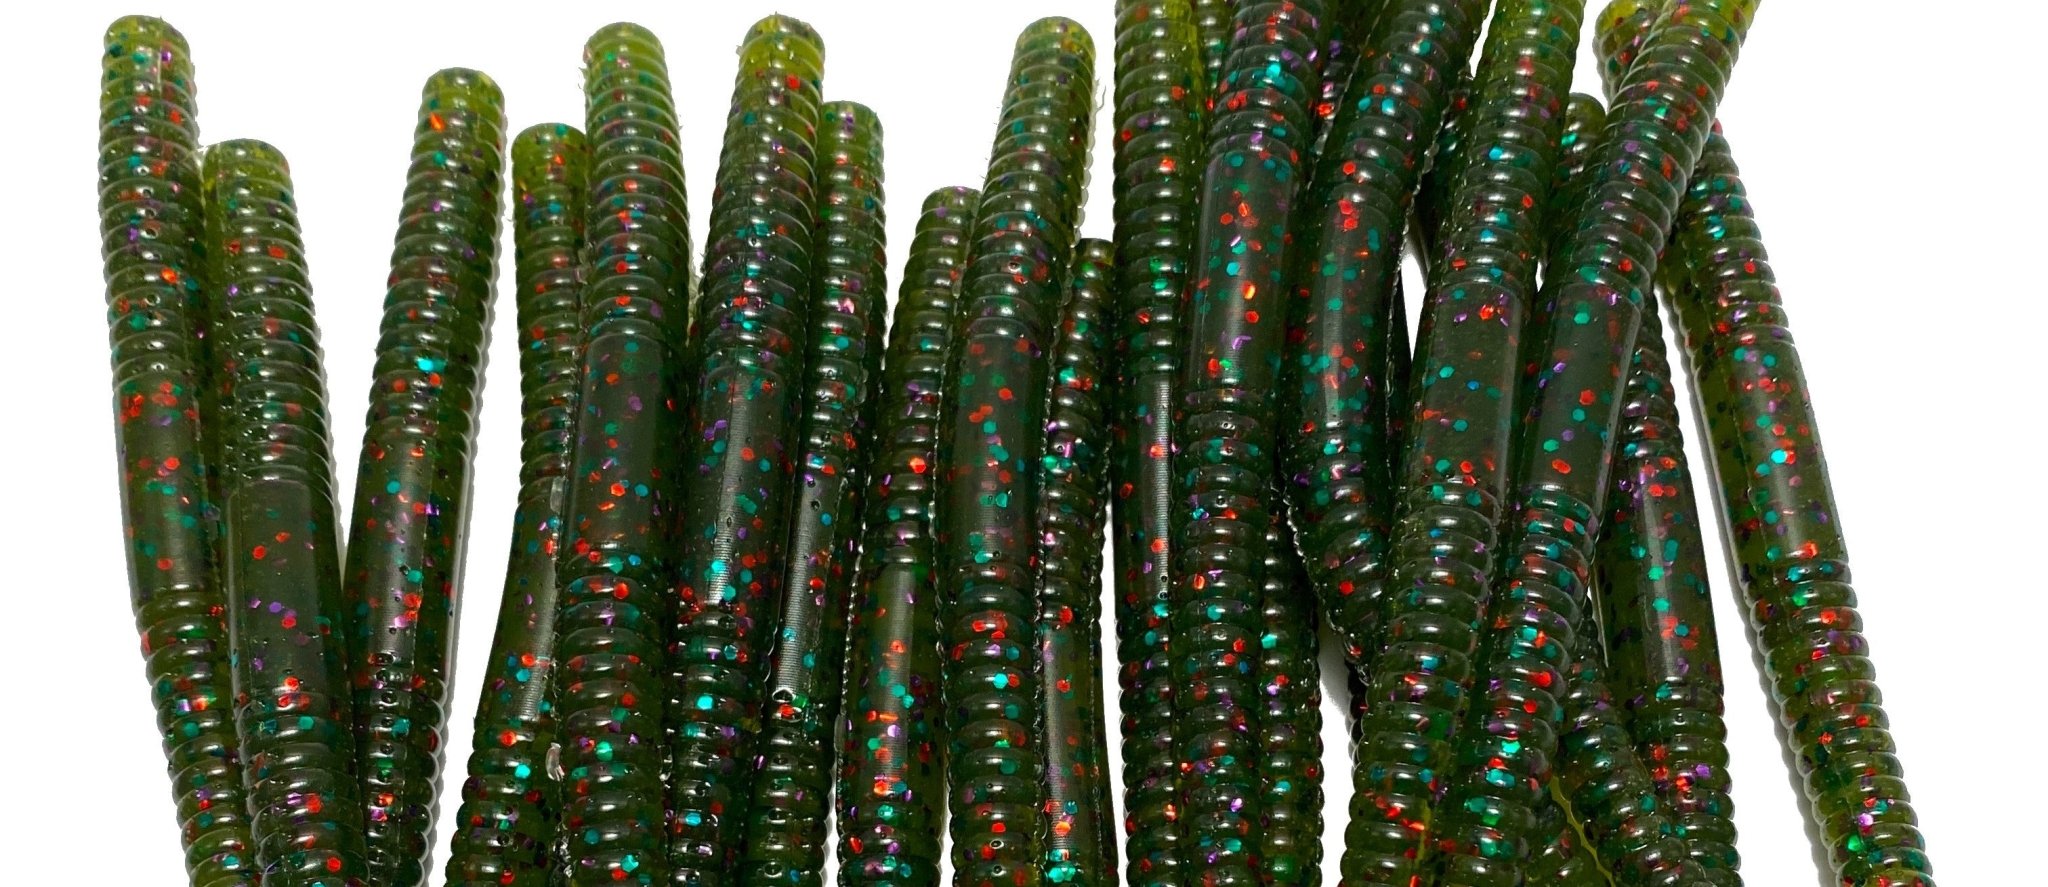 http://obeebaits.com/cdn/shop/articles/when-and-how-to-use-watermelon-soft-plastic-baits-738348.jpg?v=1699029659